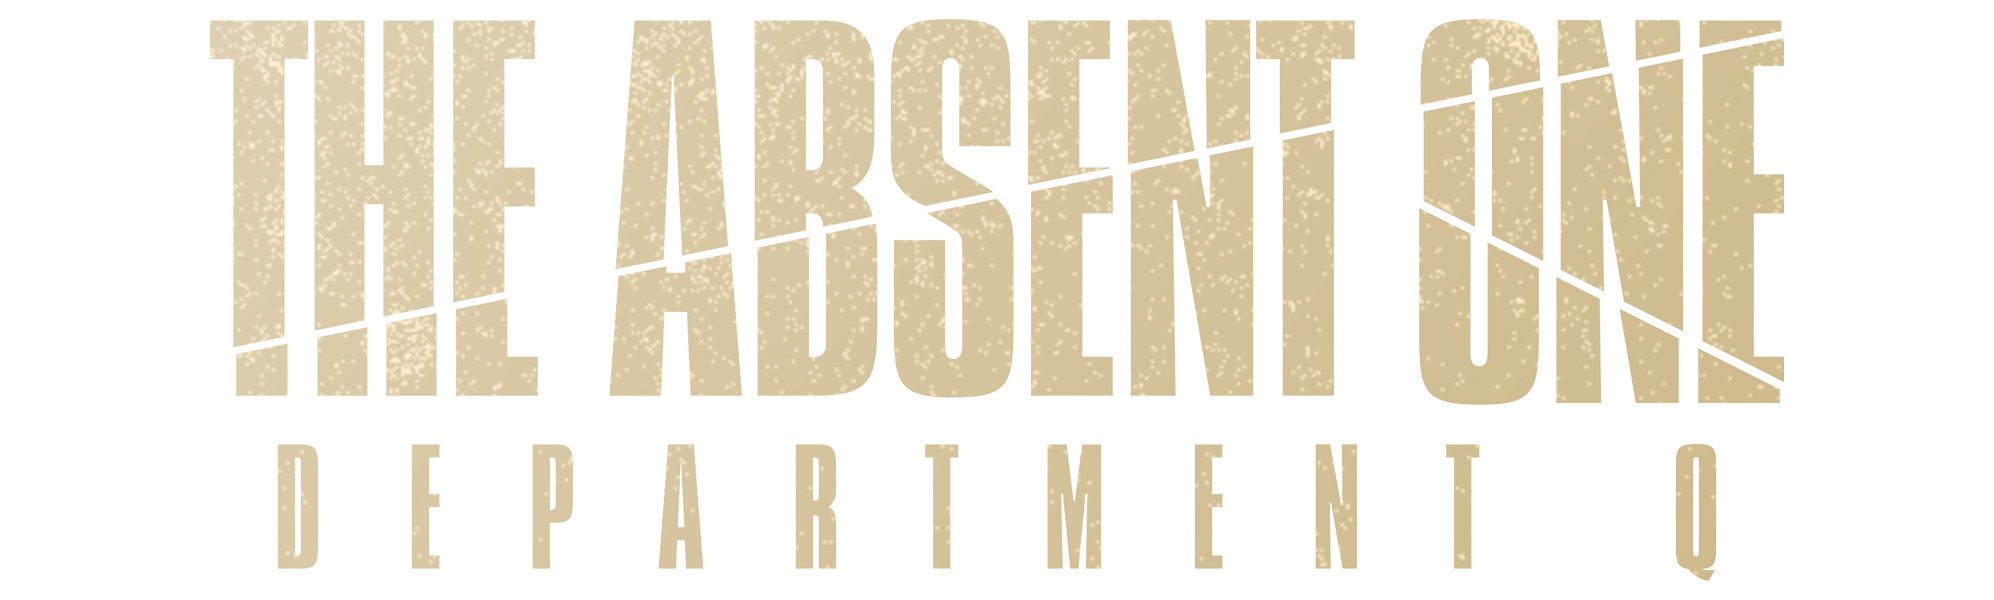 Dept. Q: The Absent One (Part 2)